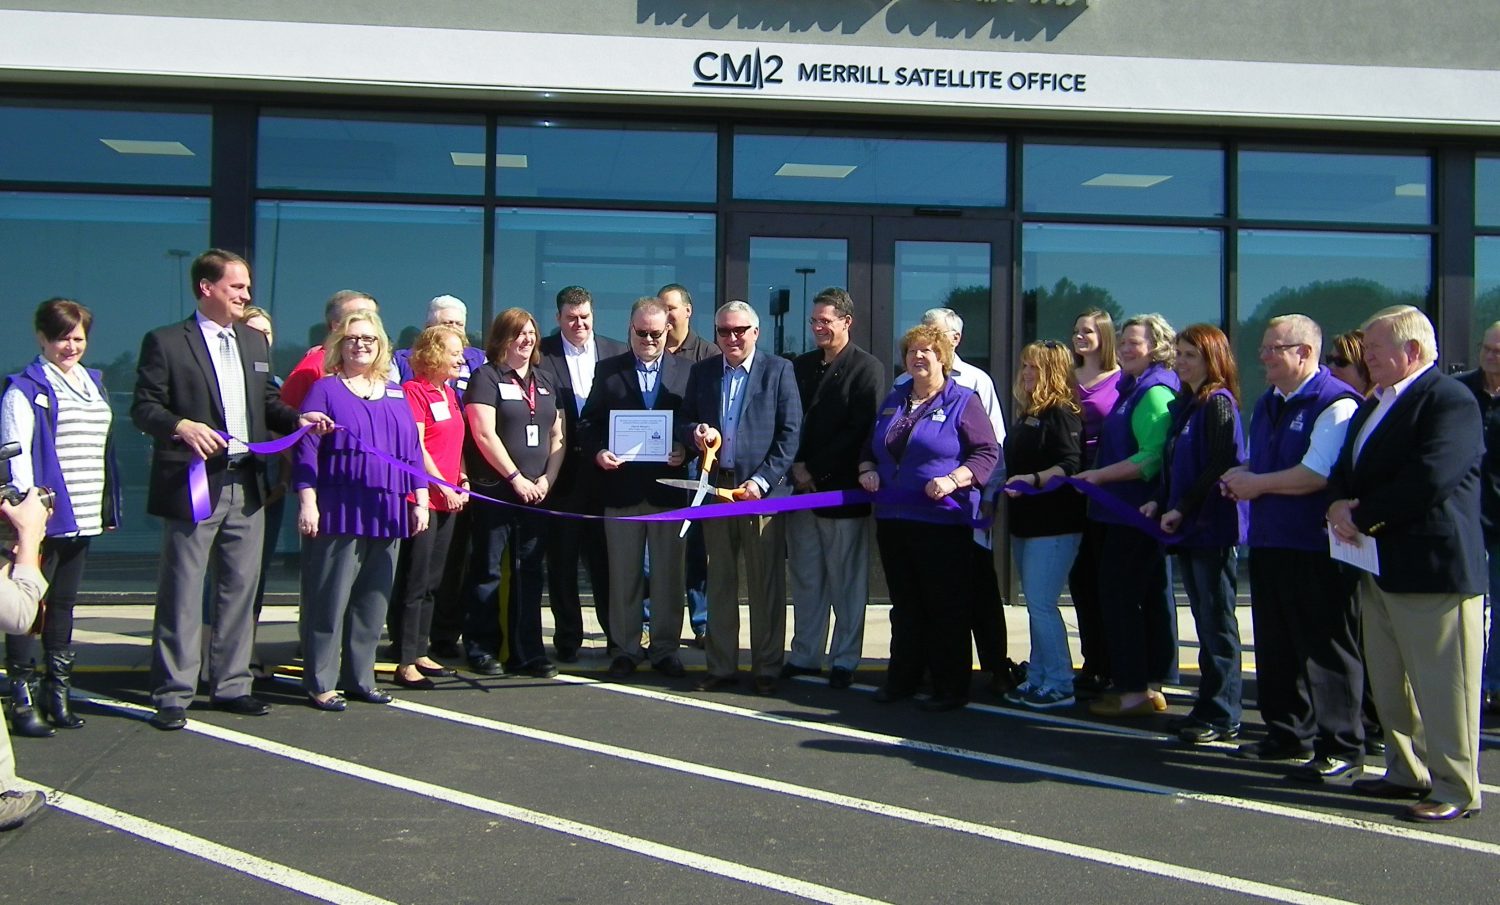 Church Mutual opens doors to CM2 Satellite Office